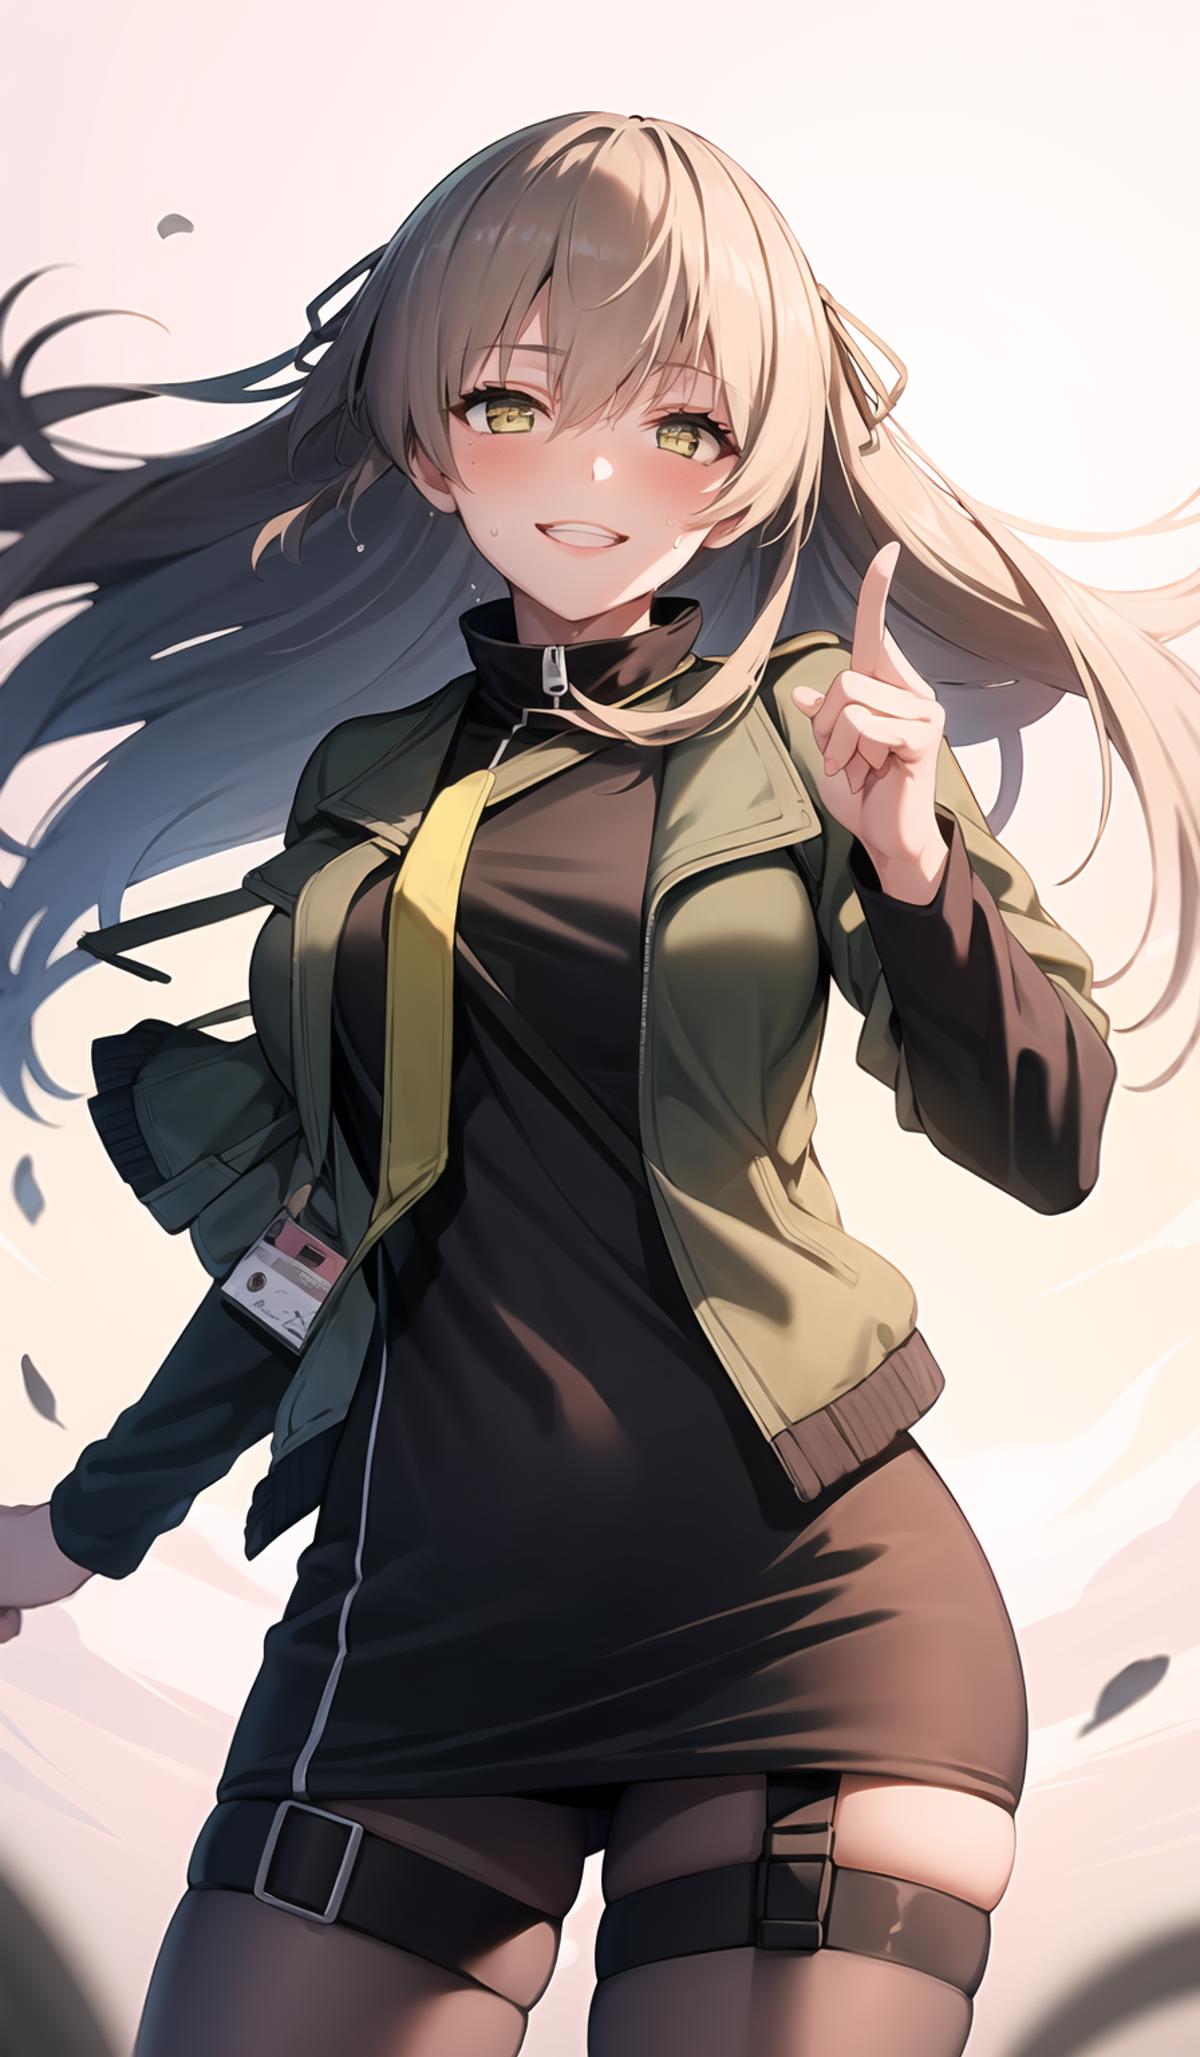 Girls' Frontline-UMP40-Moon River & Original outfits (With multires noise version) image by L_A_X